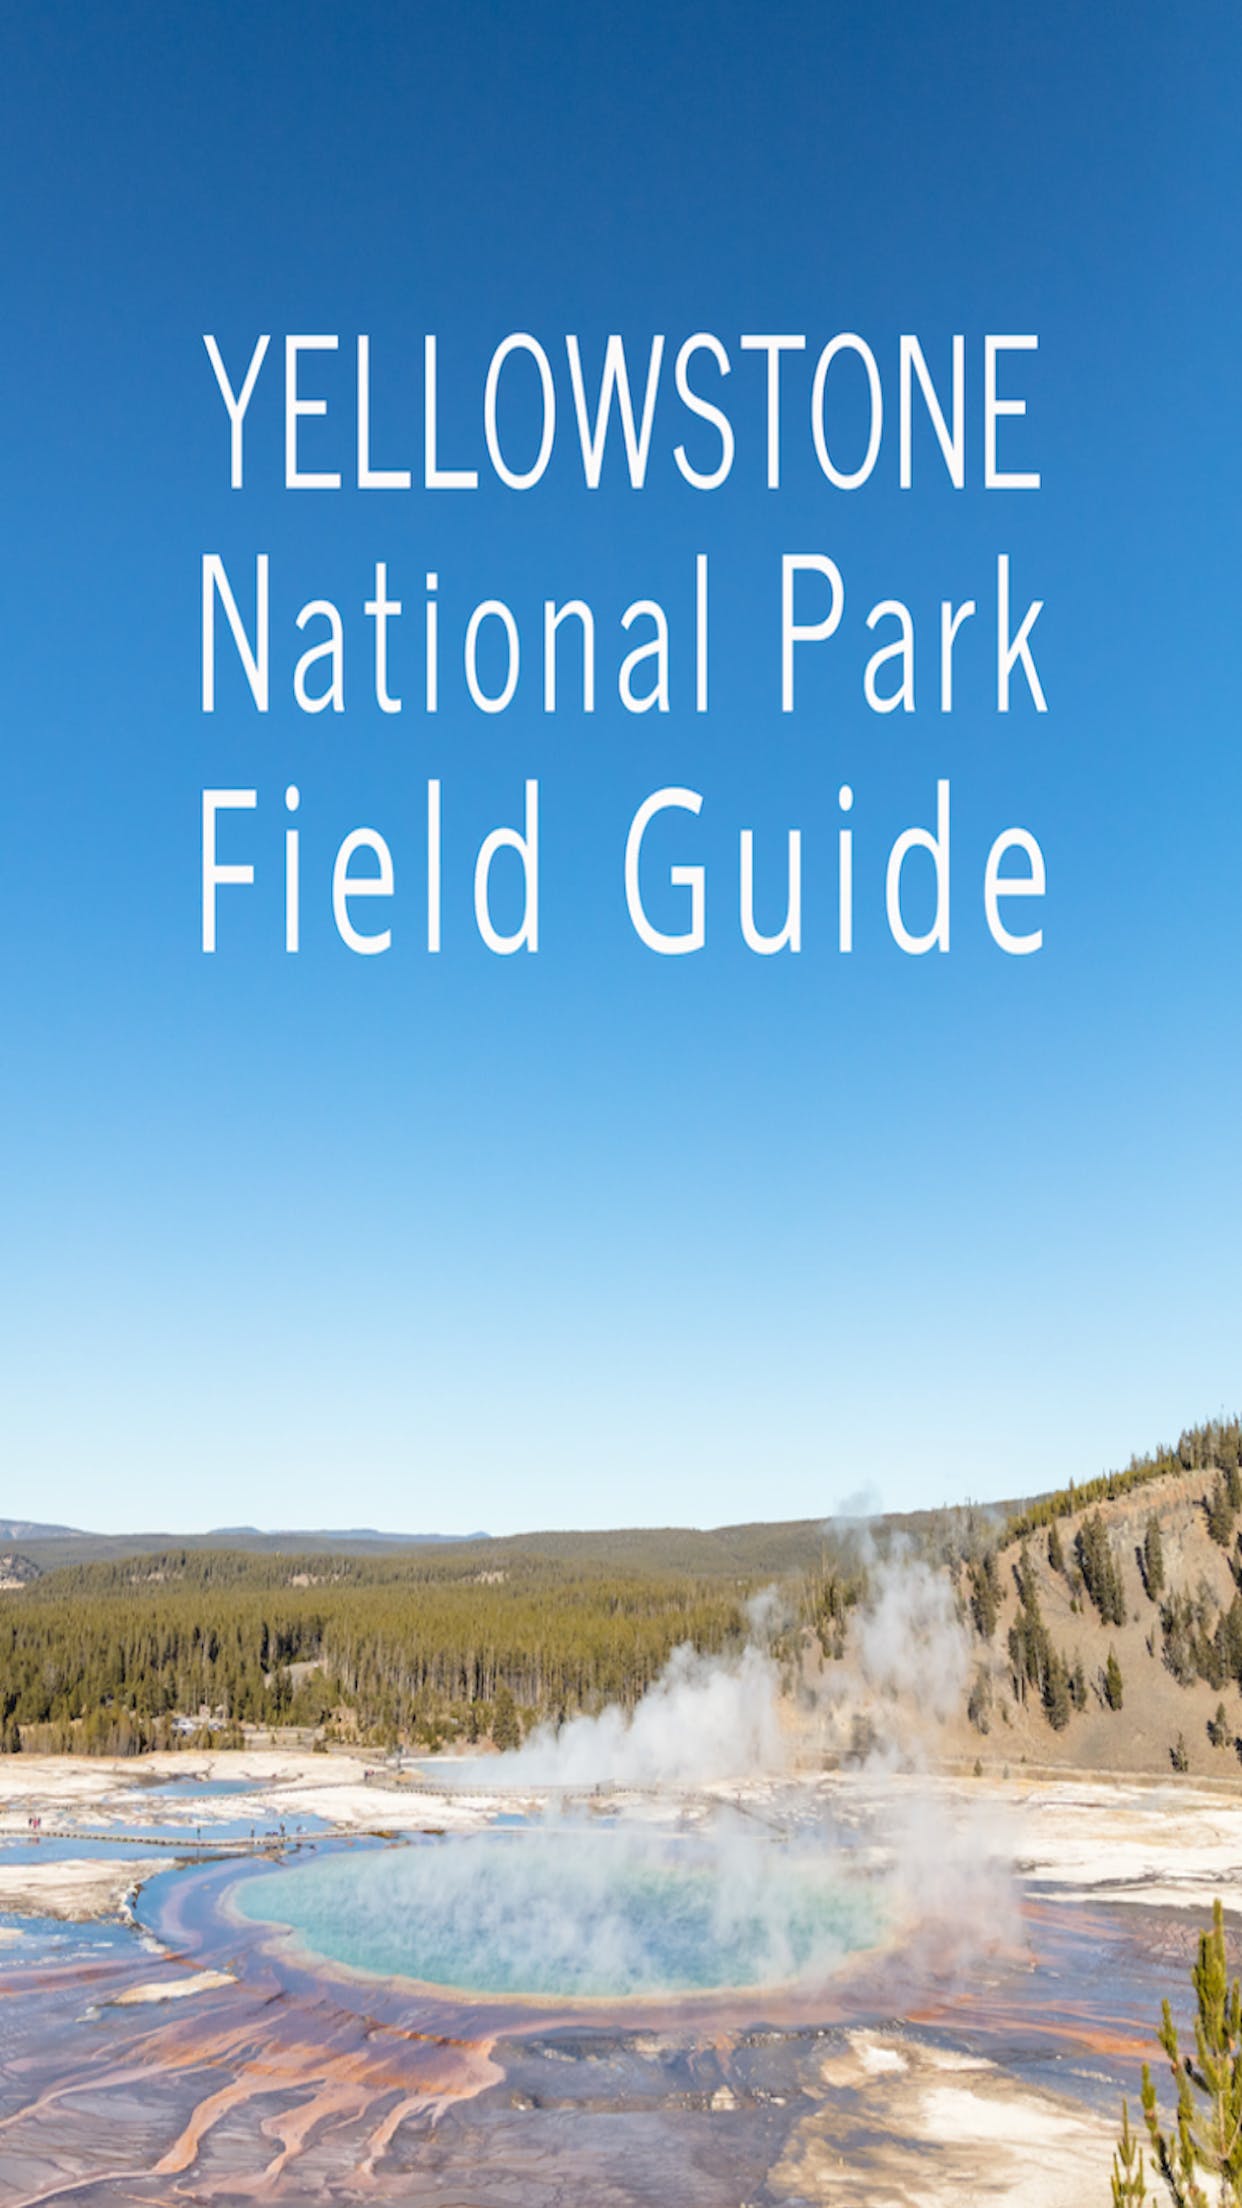 Yellowstone NP Field Guide media 1